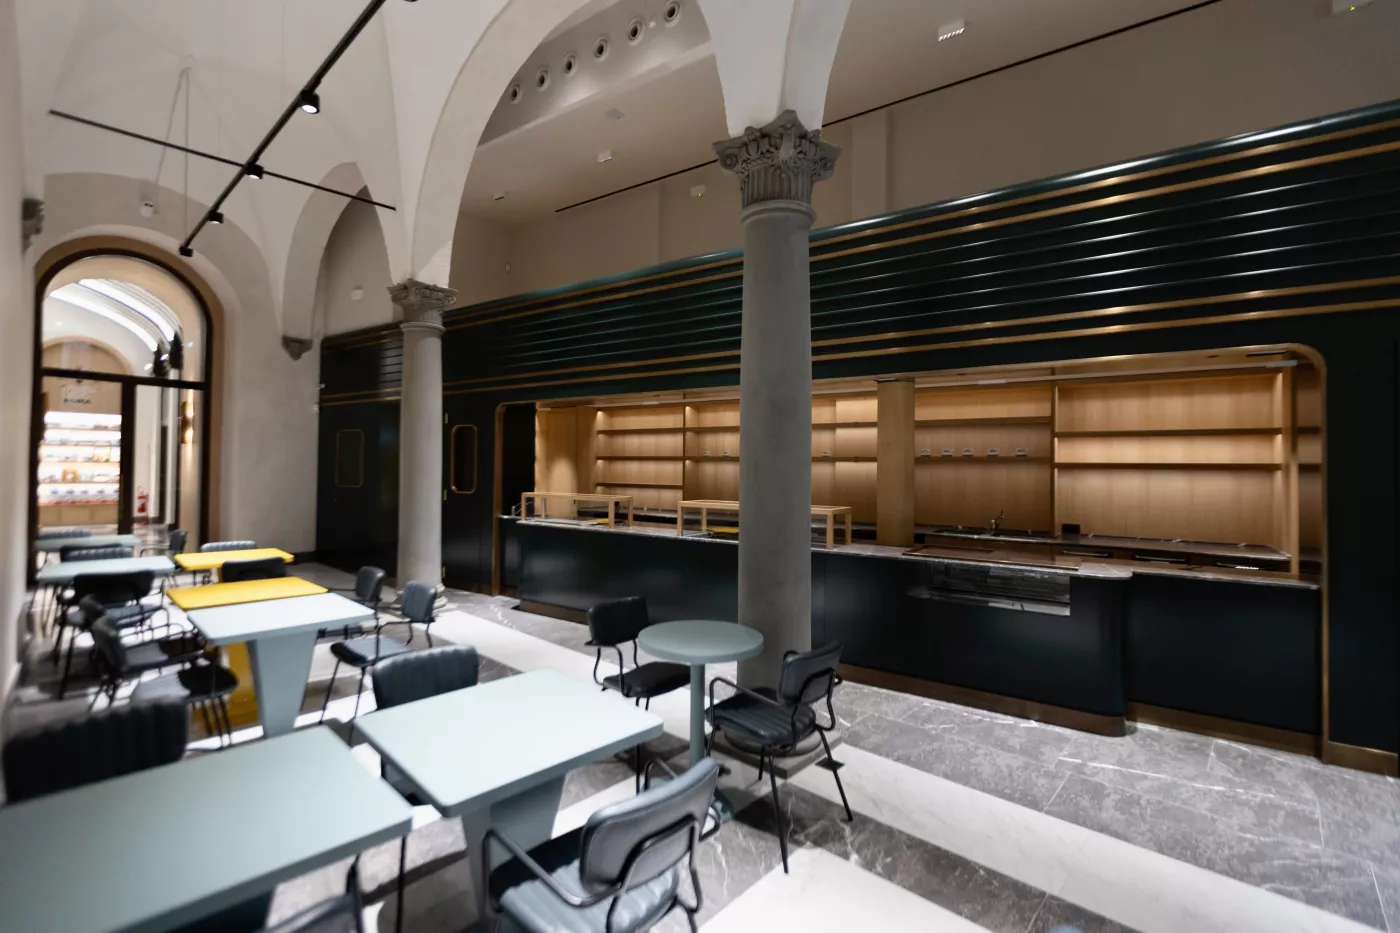 Tåg fusion bistrot, the gastronomic stop in florence on the hzero journey